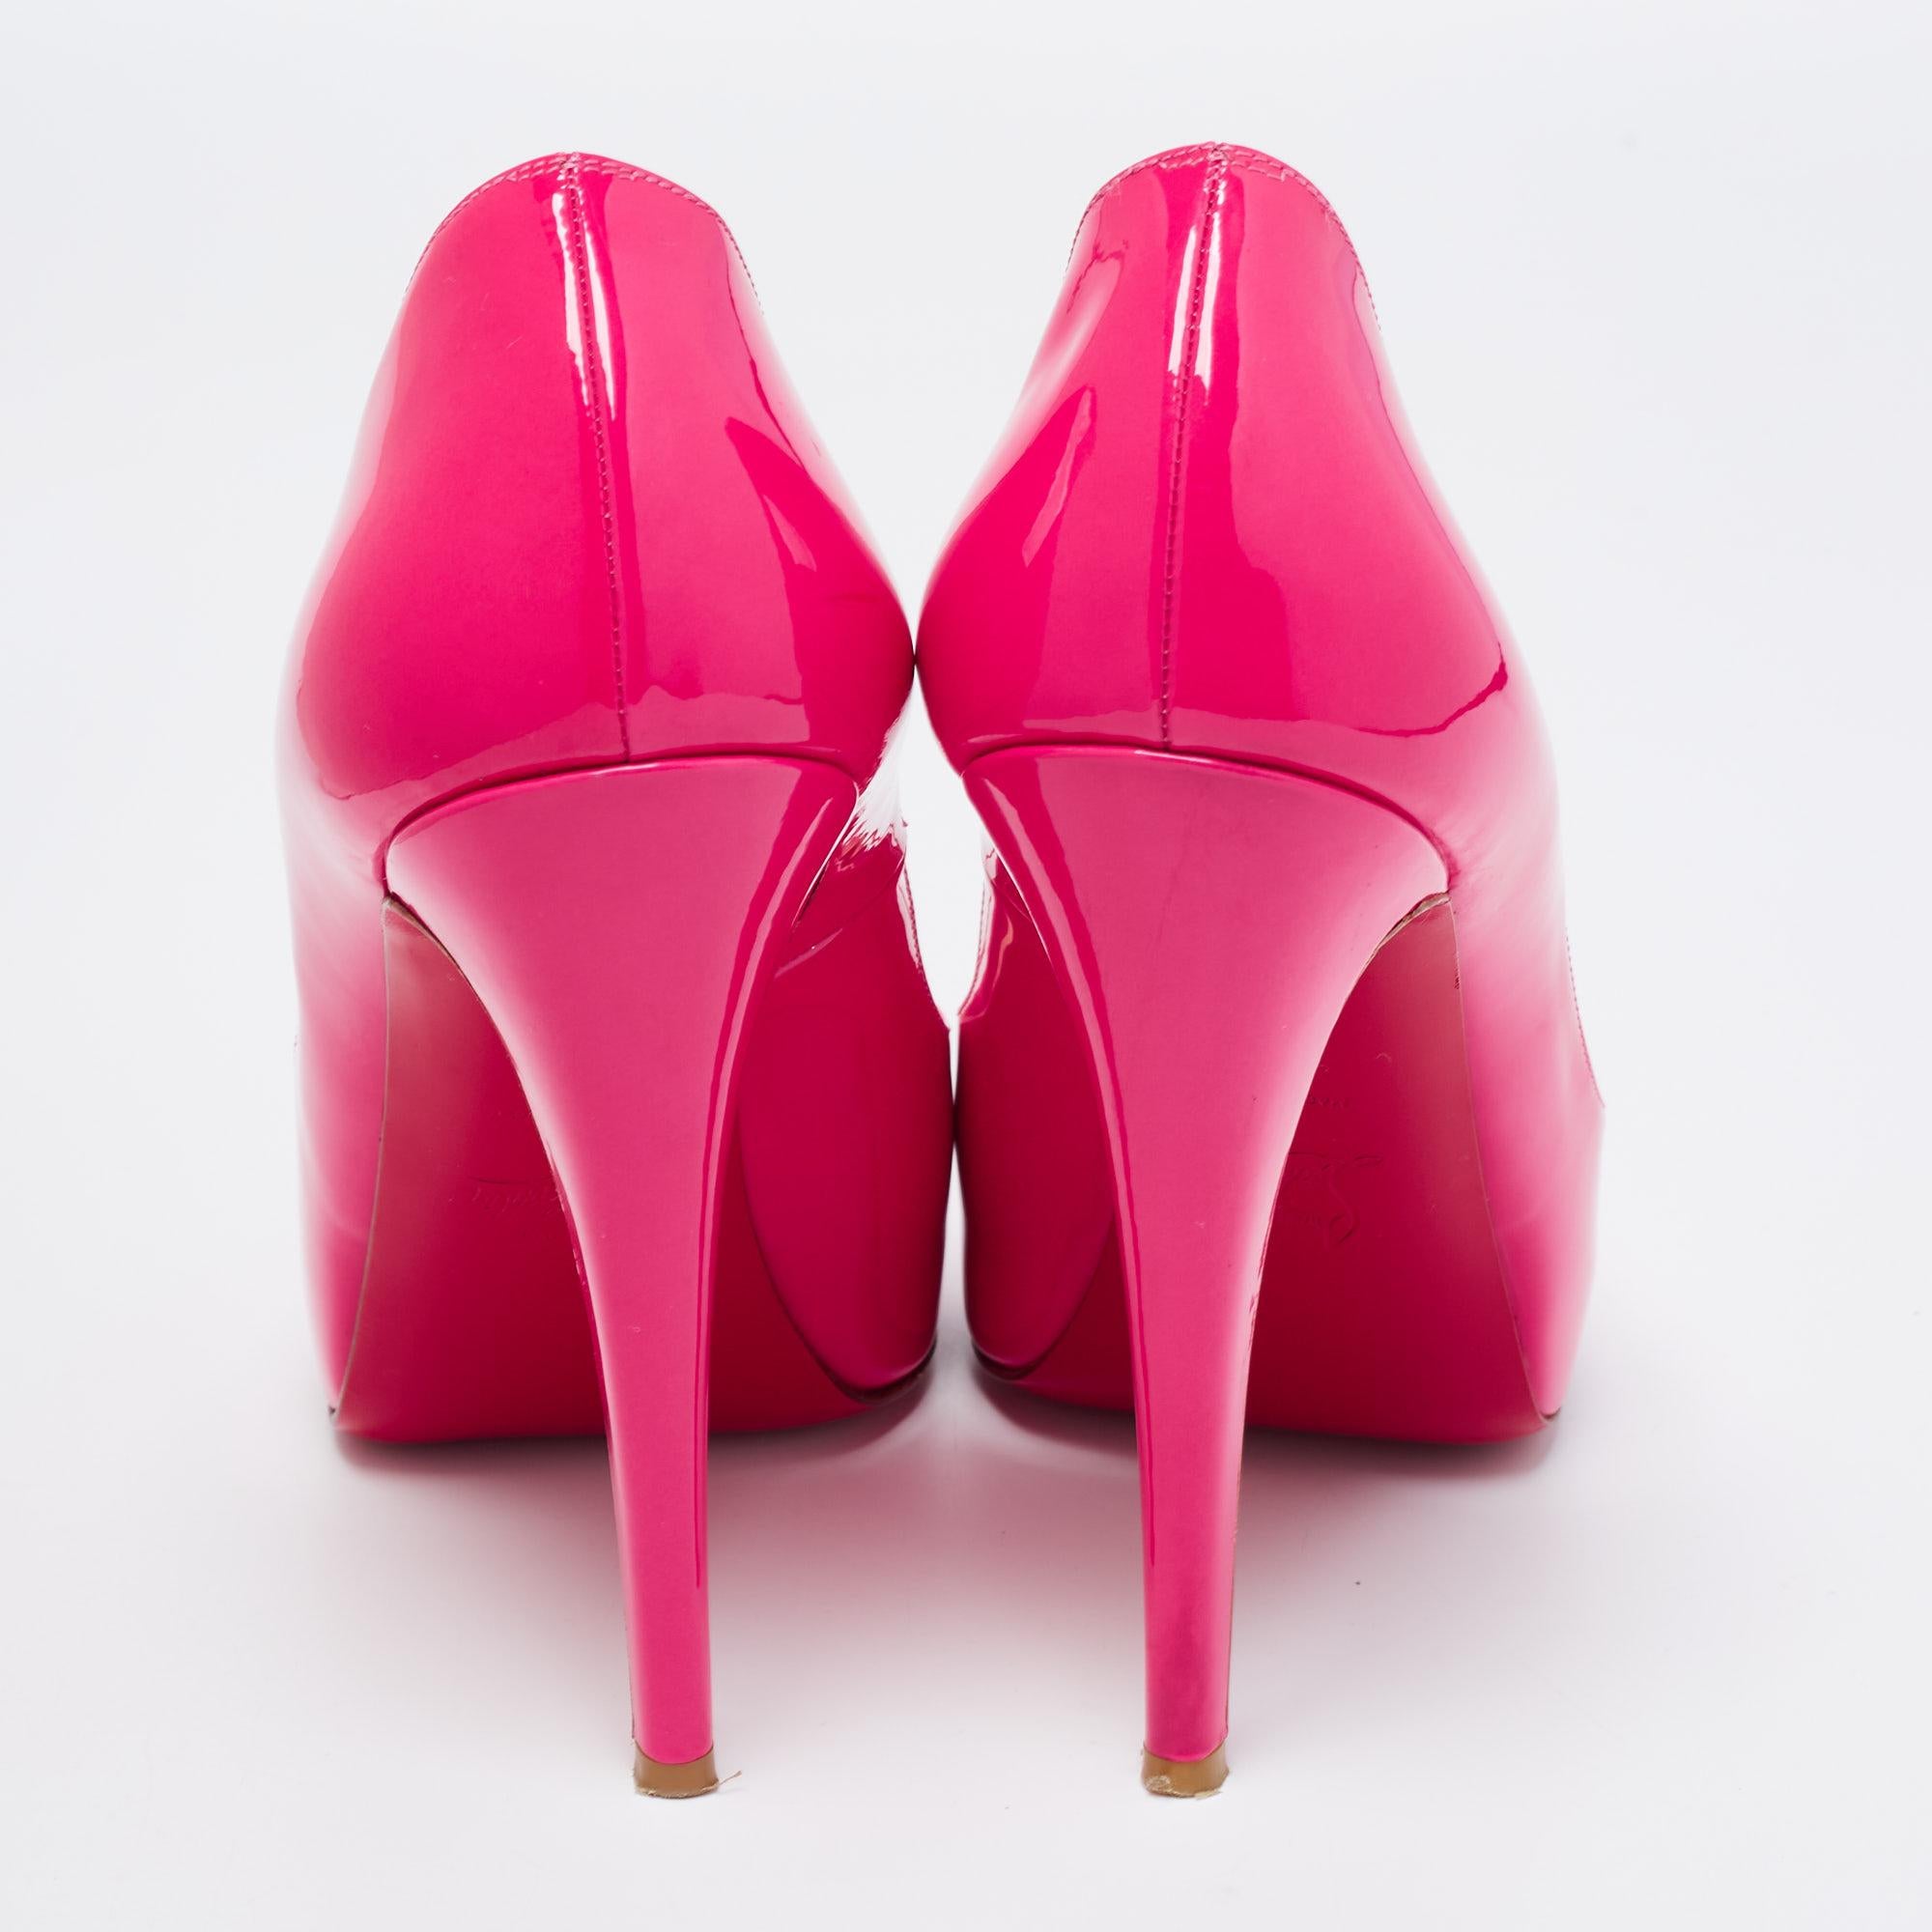 Women's Christian Louboutin Pink Patent Leather New Very Prive Pumps Size 41 For Sale